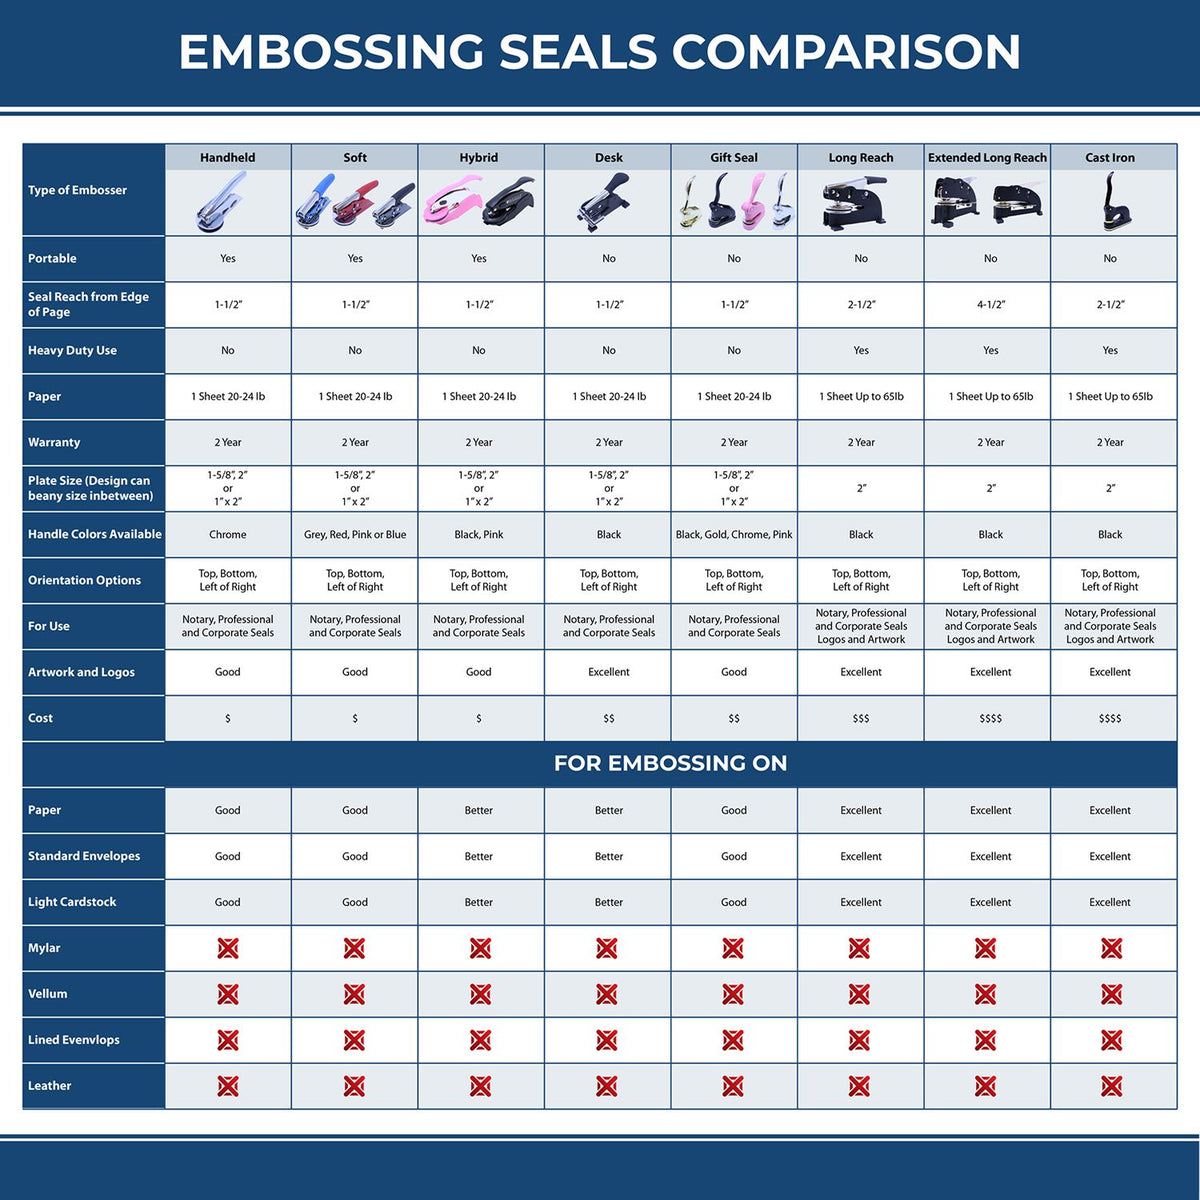 Architect Red Seal Handheld Embosser 3035ARC Embossing Seal Comparison